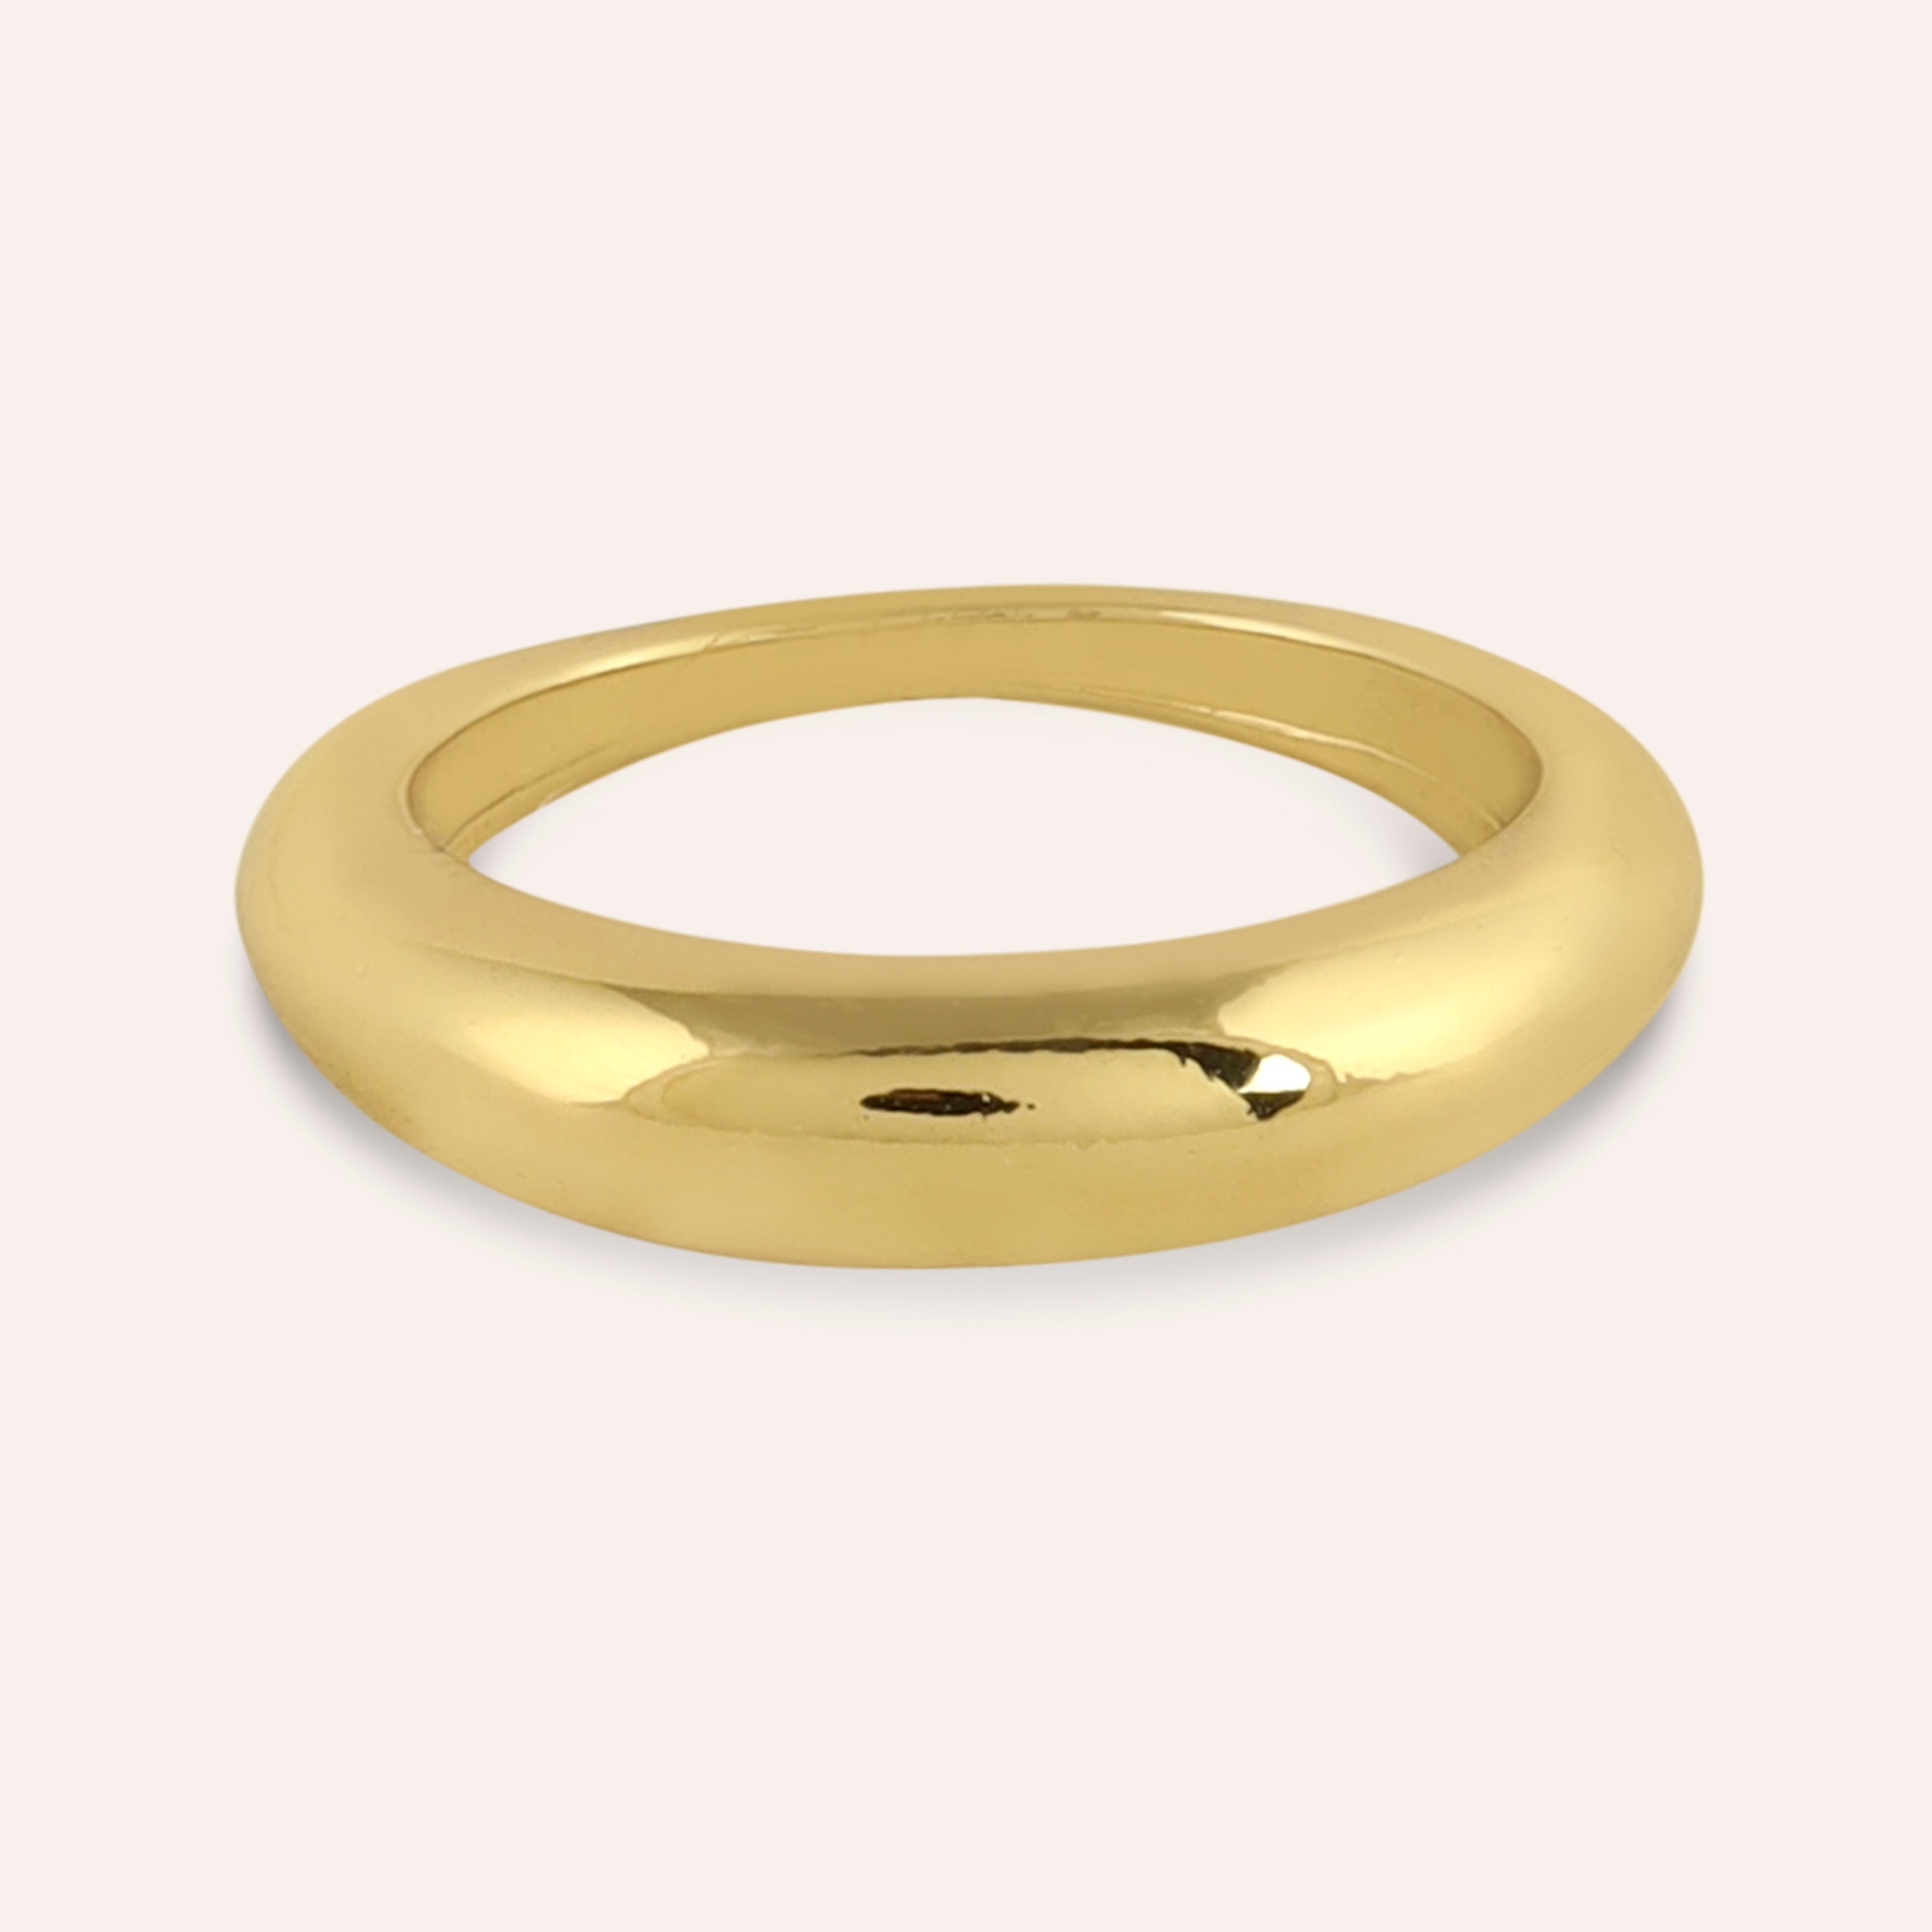 TFC Glimmer Glow Gold Plated Ring- Elevate your style with our exquisite collection of gold-plated adjustable rings for women, including timeless signet rings. Explore cheapest fashion jewellery designs with anti-tarnish properties, all at The Fun Company with a touch of elegance